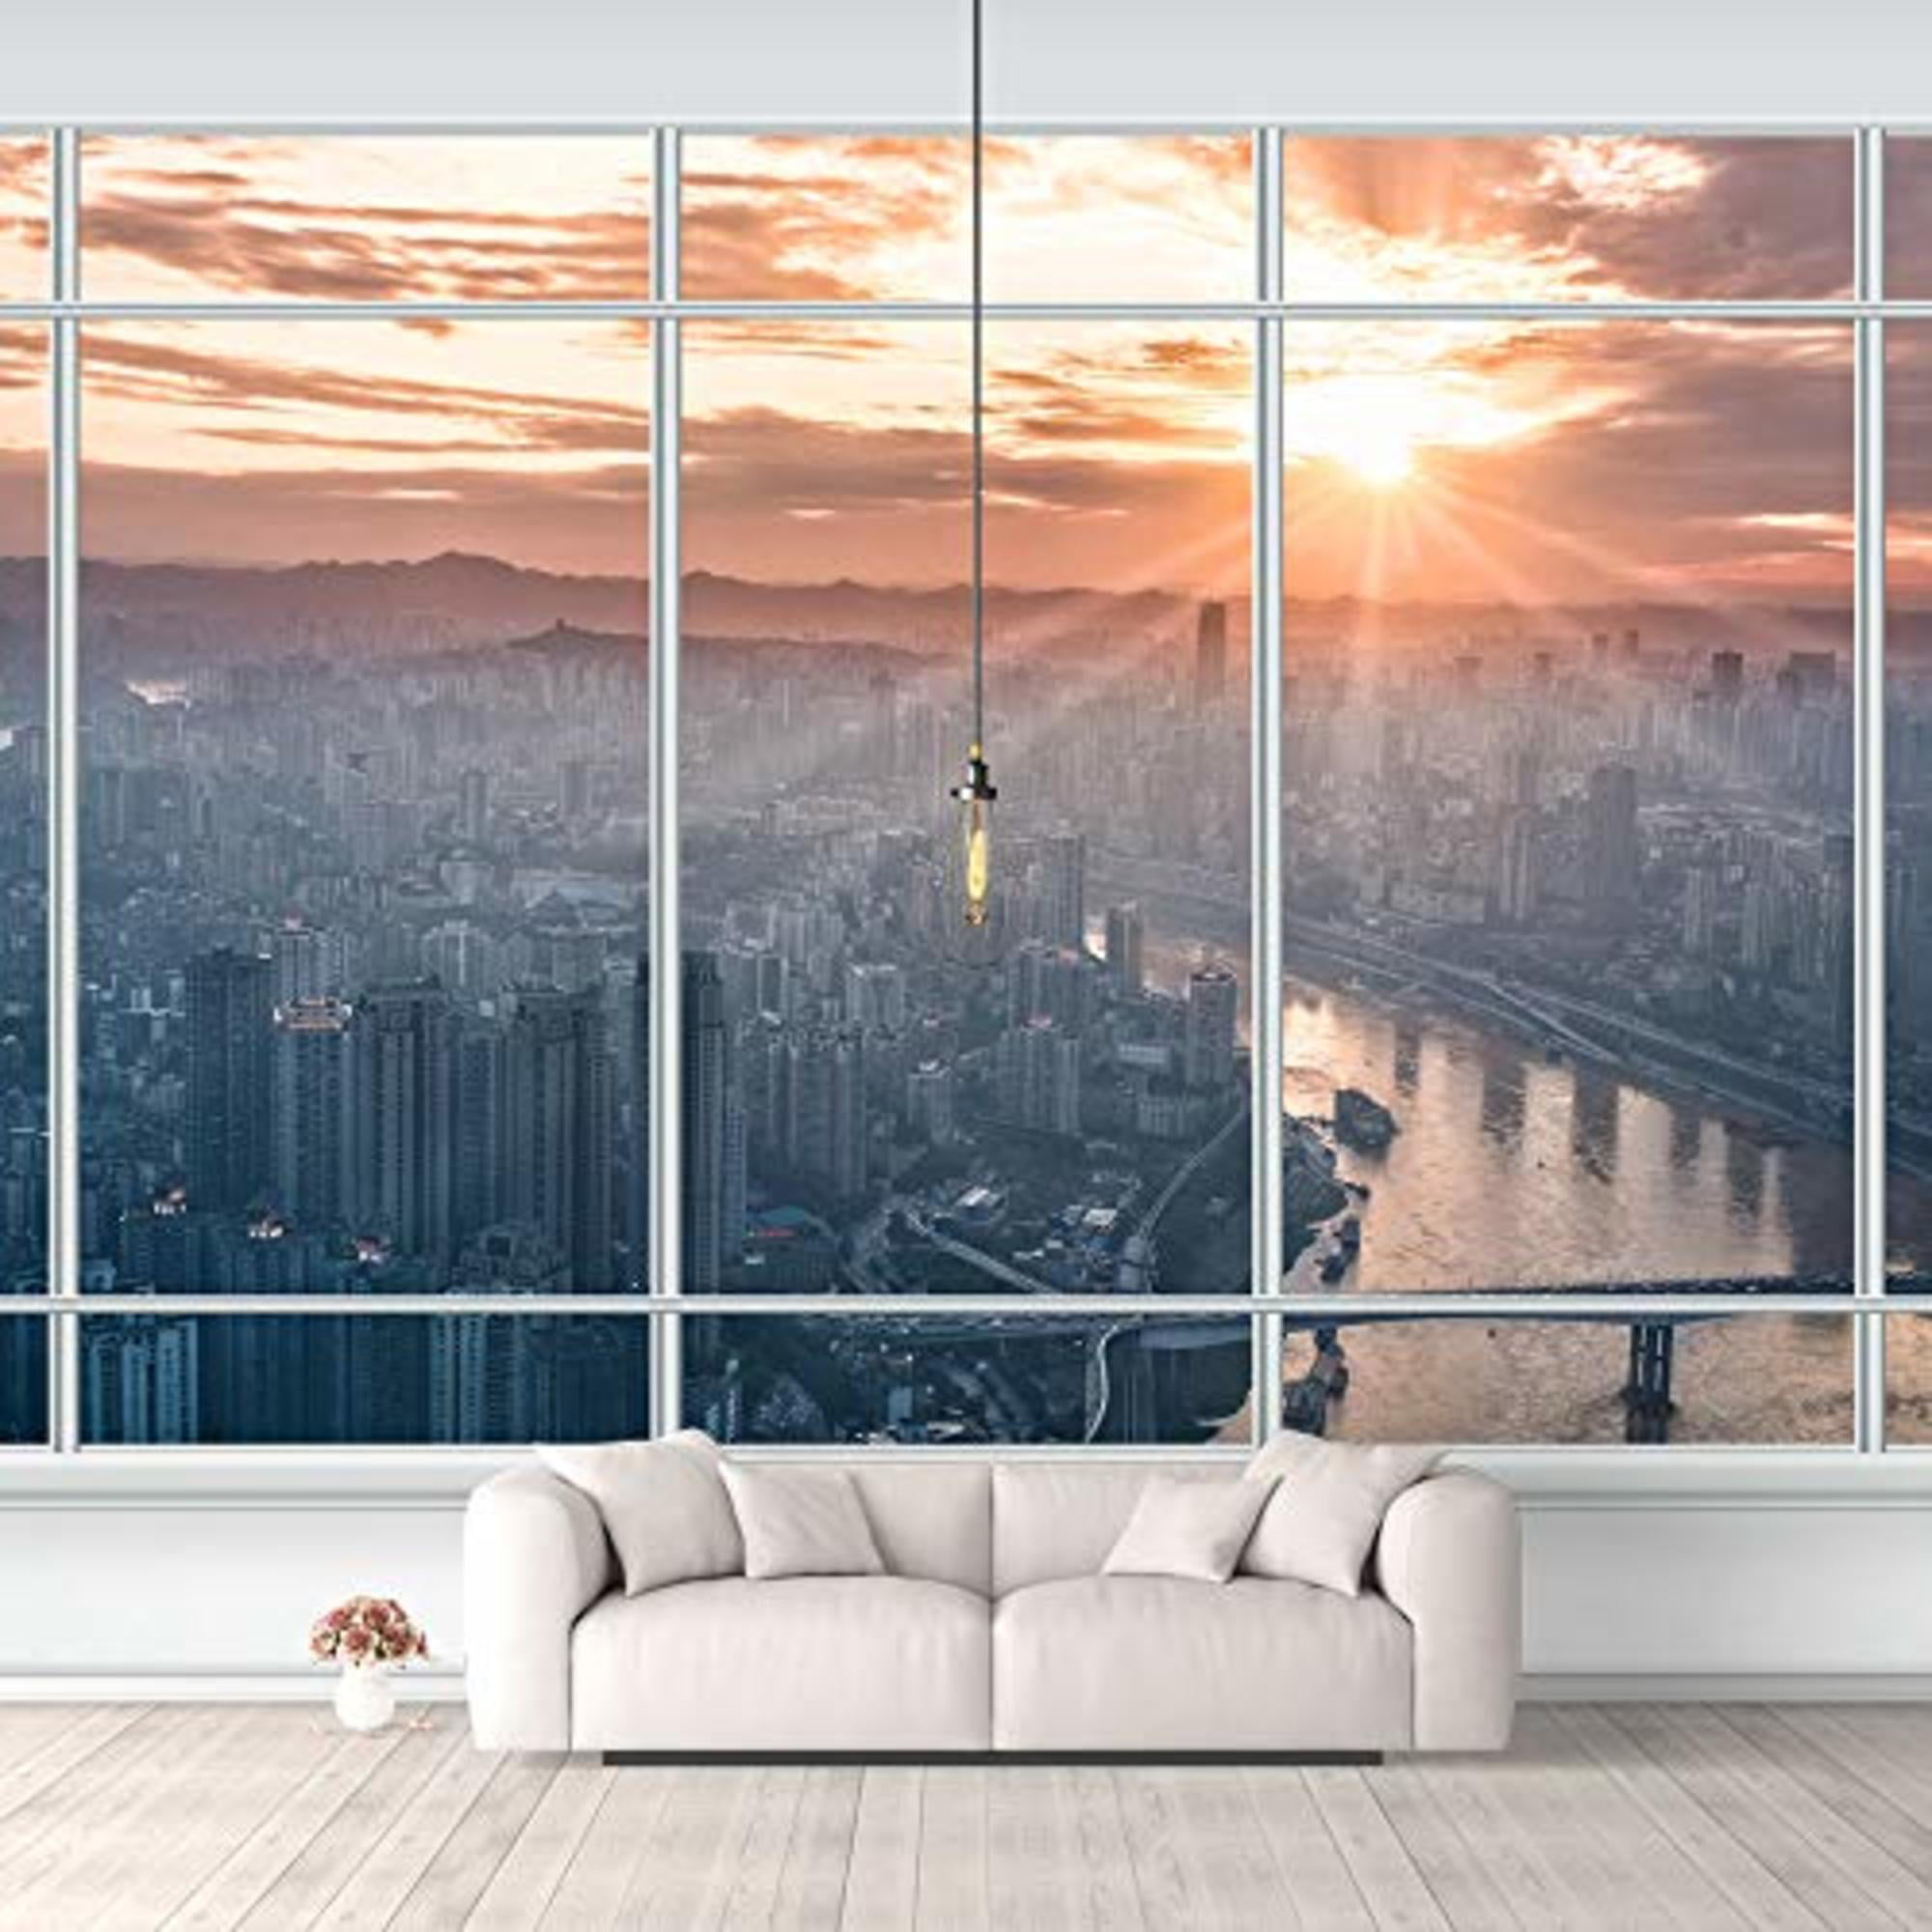 High-Rise Building 3D Wall Murals Wallpapers, Modern City Self-Adhesive  Wallpaper Large Wall Mural, Removable Wallpaper Wall Sticker, for Living  Room